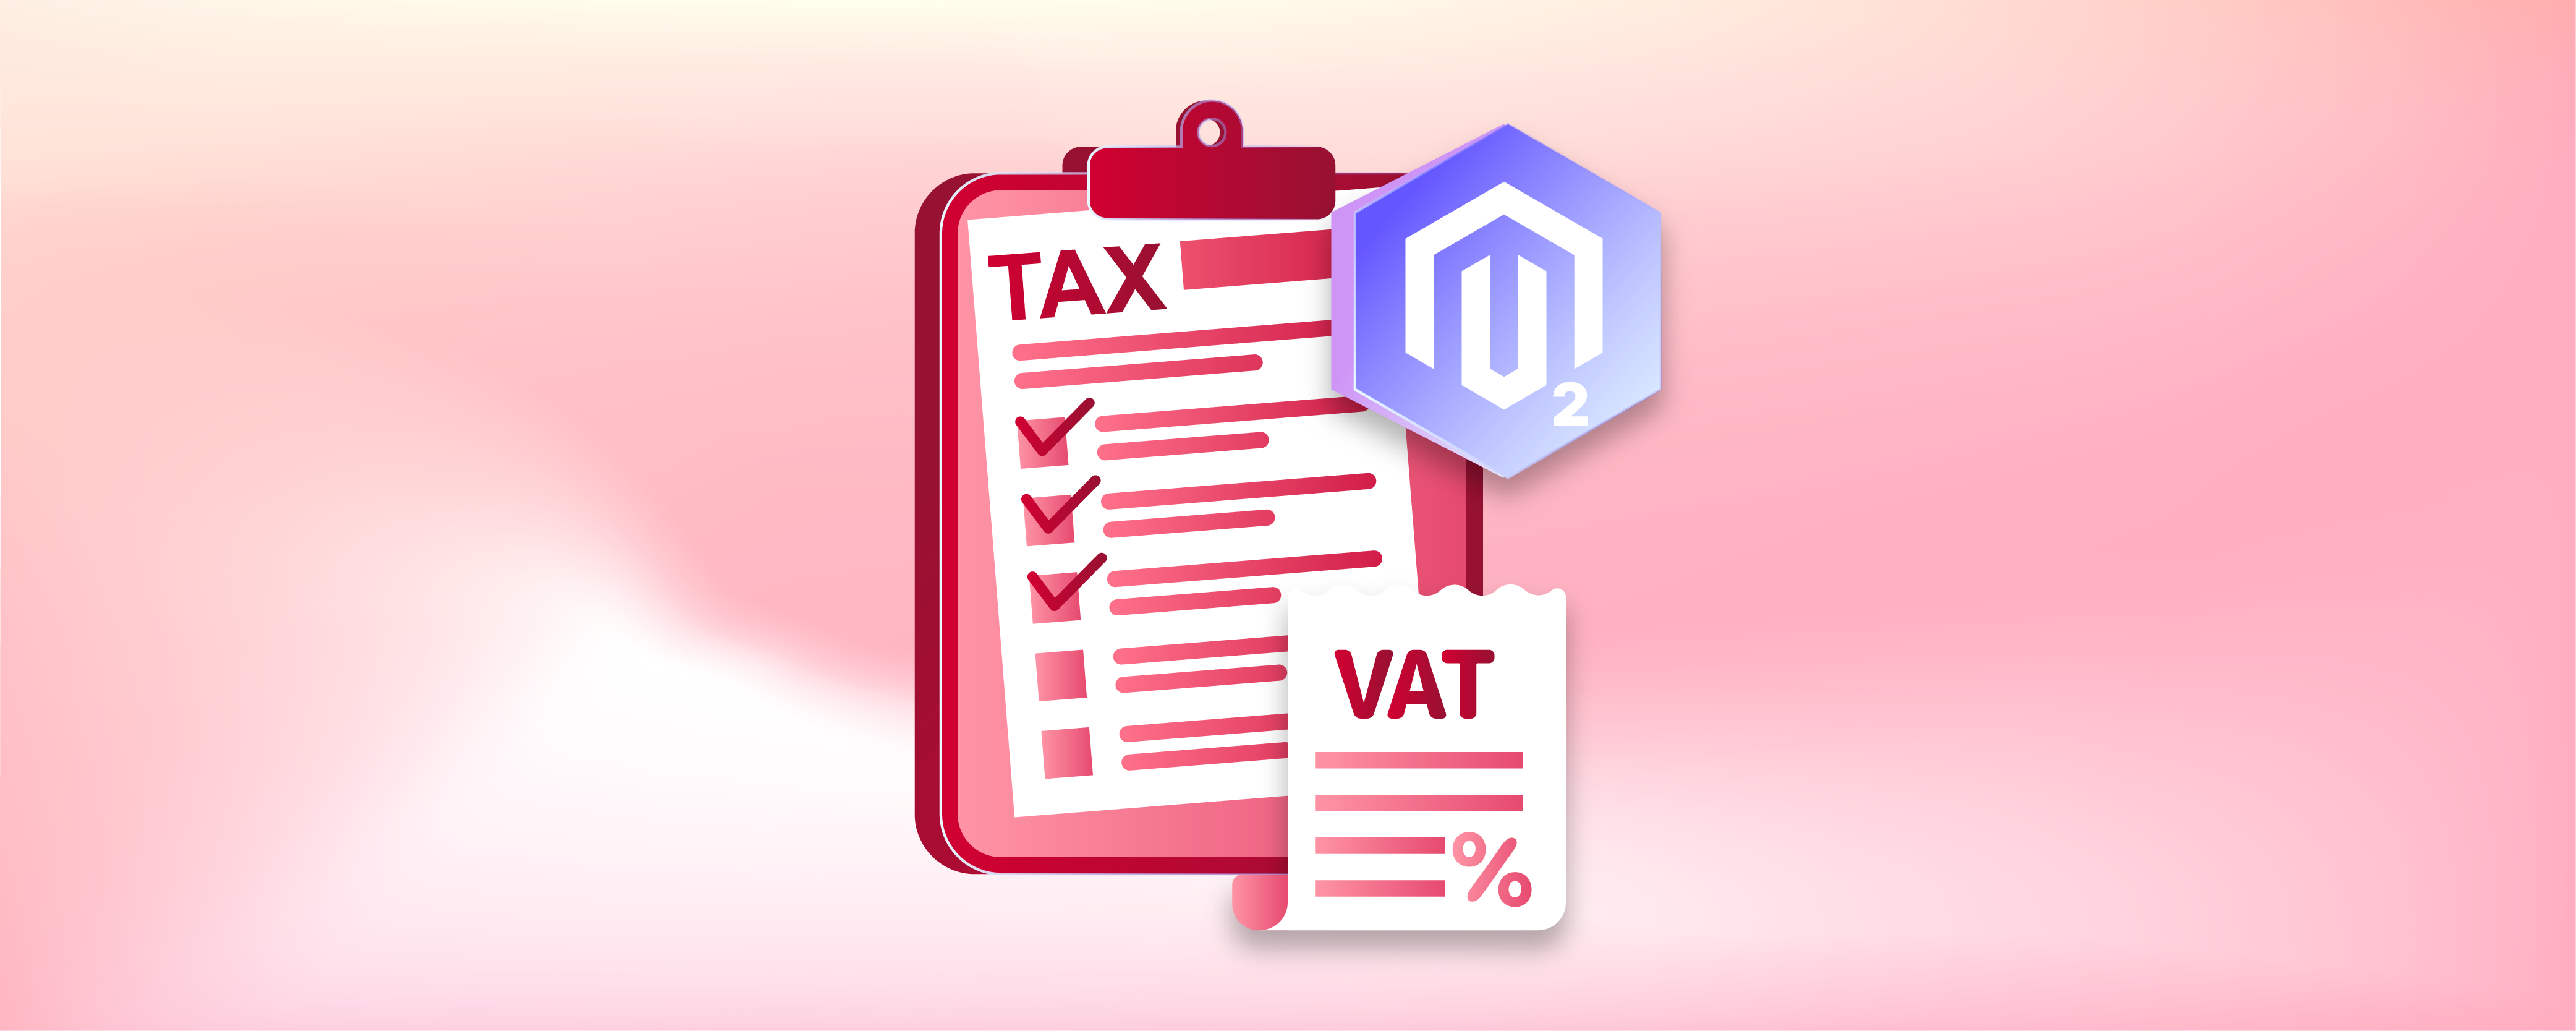 How to Configure Value Added Tax (VAT) in Magento 2